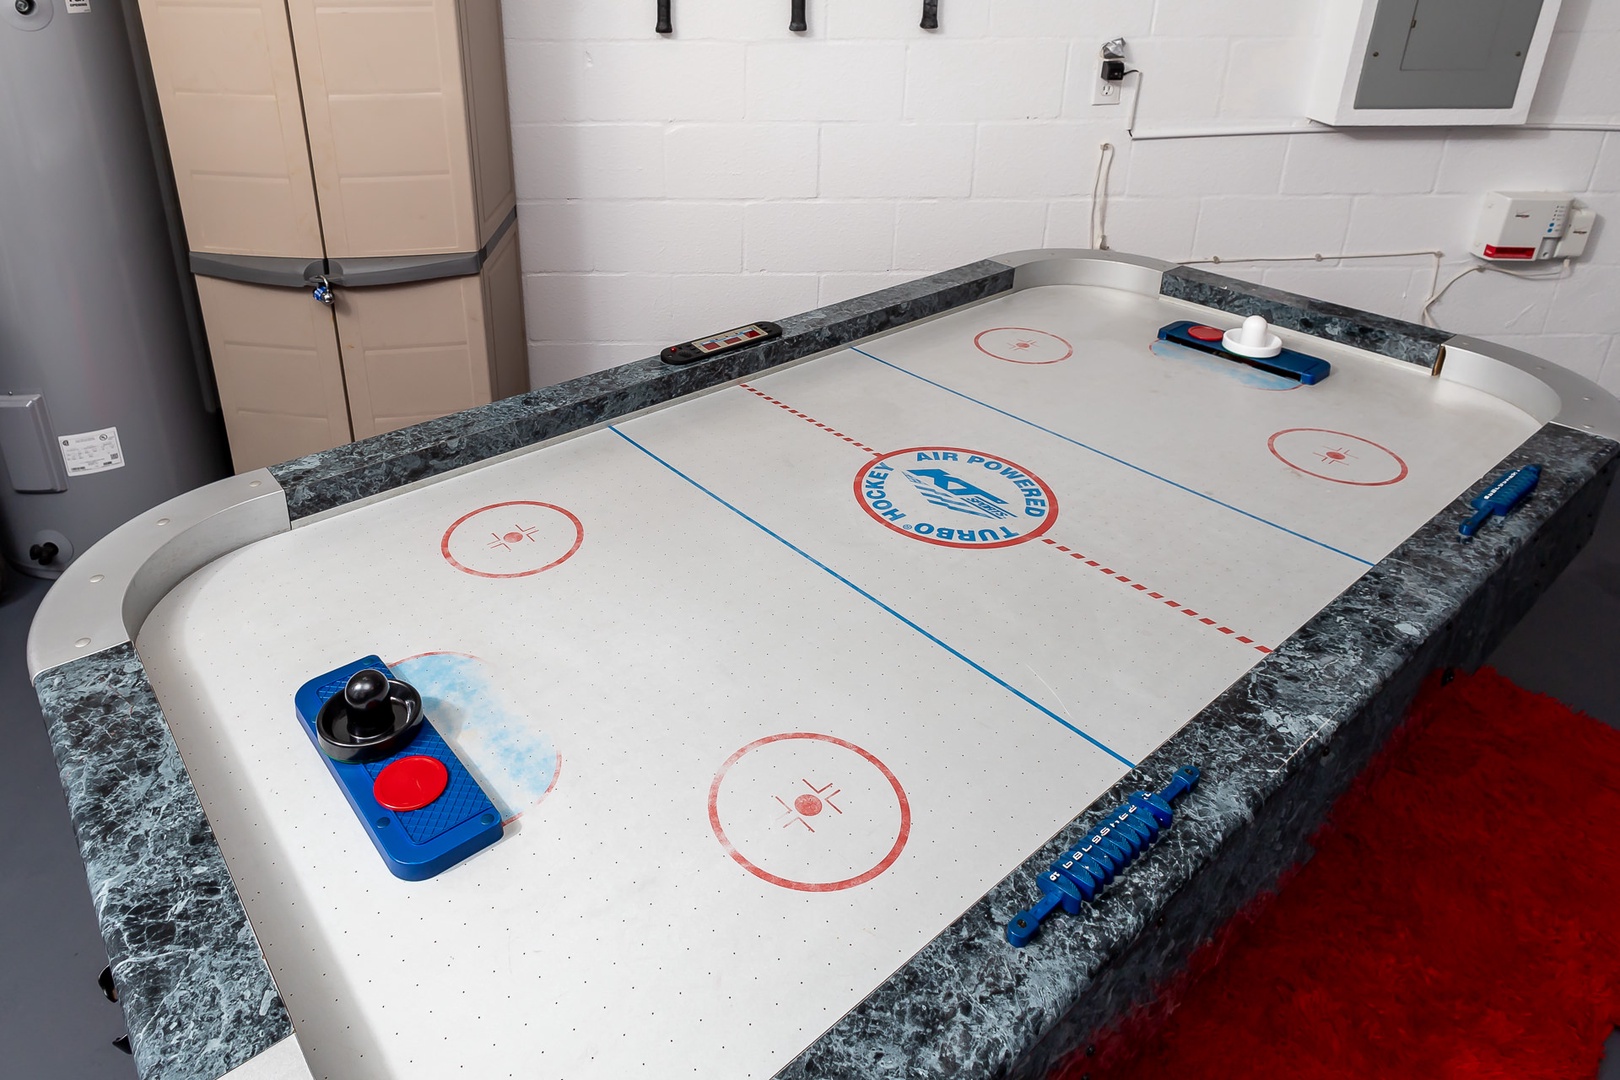 Game room with ping pong table, hockey, etc.